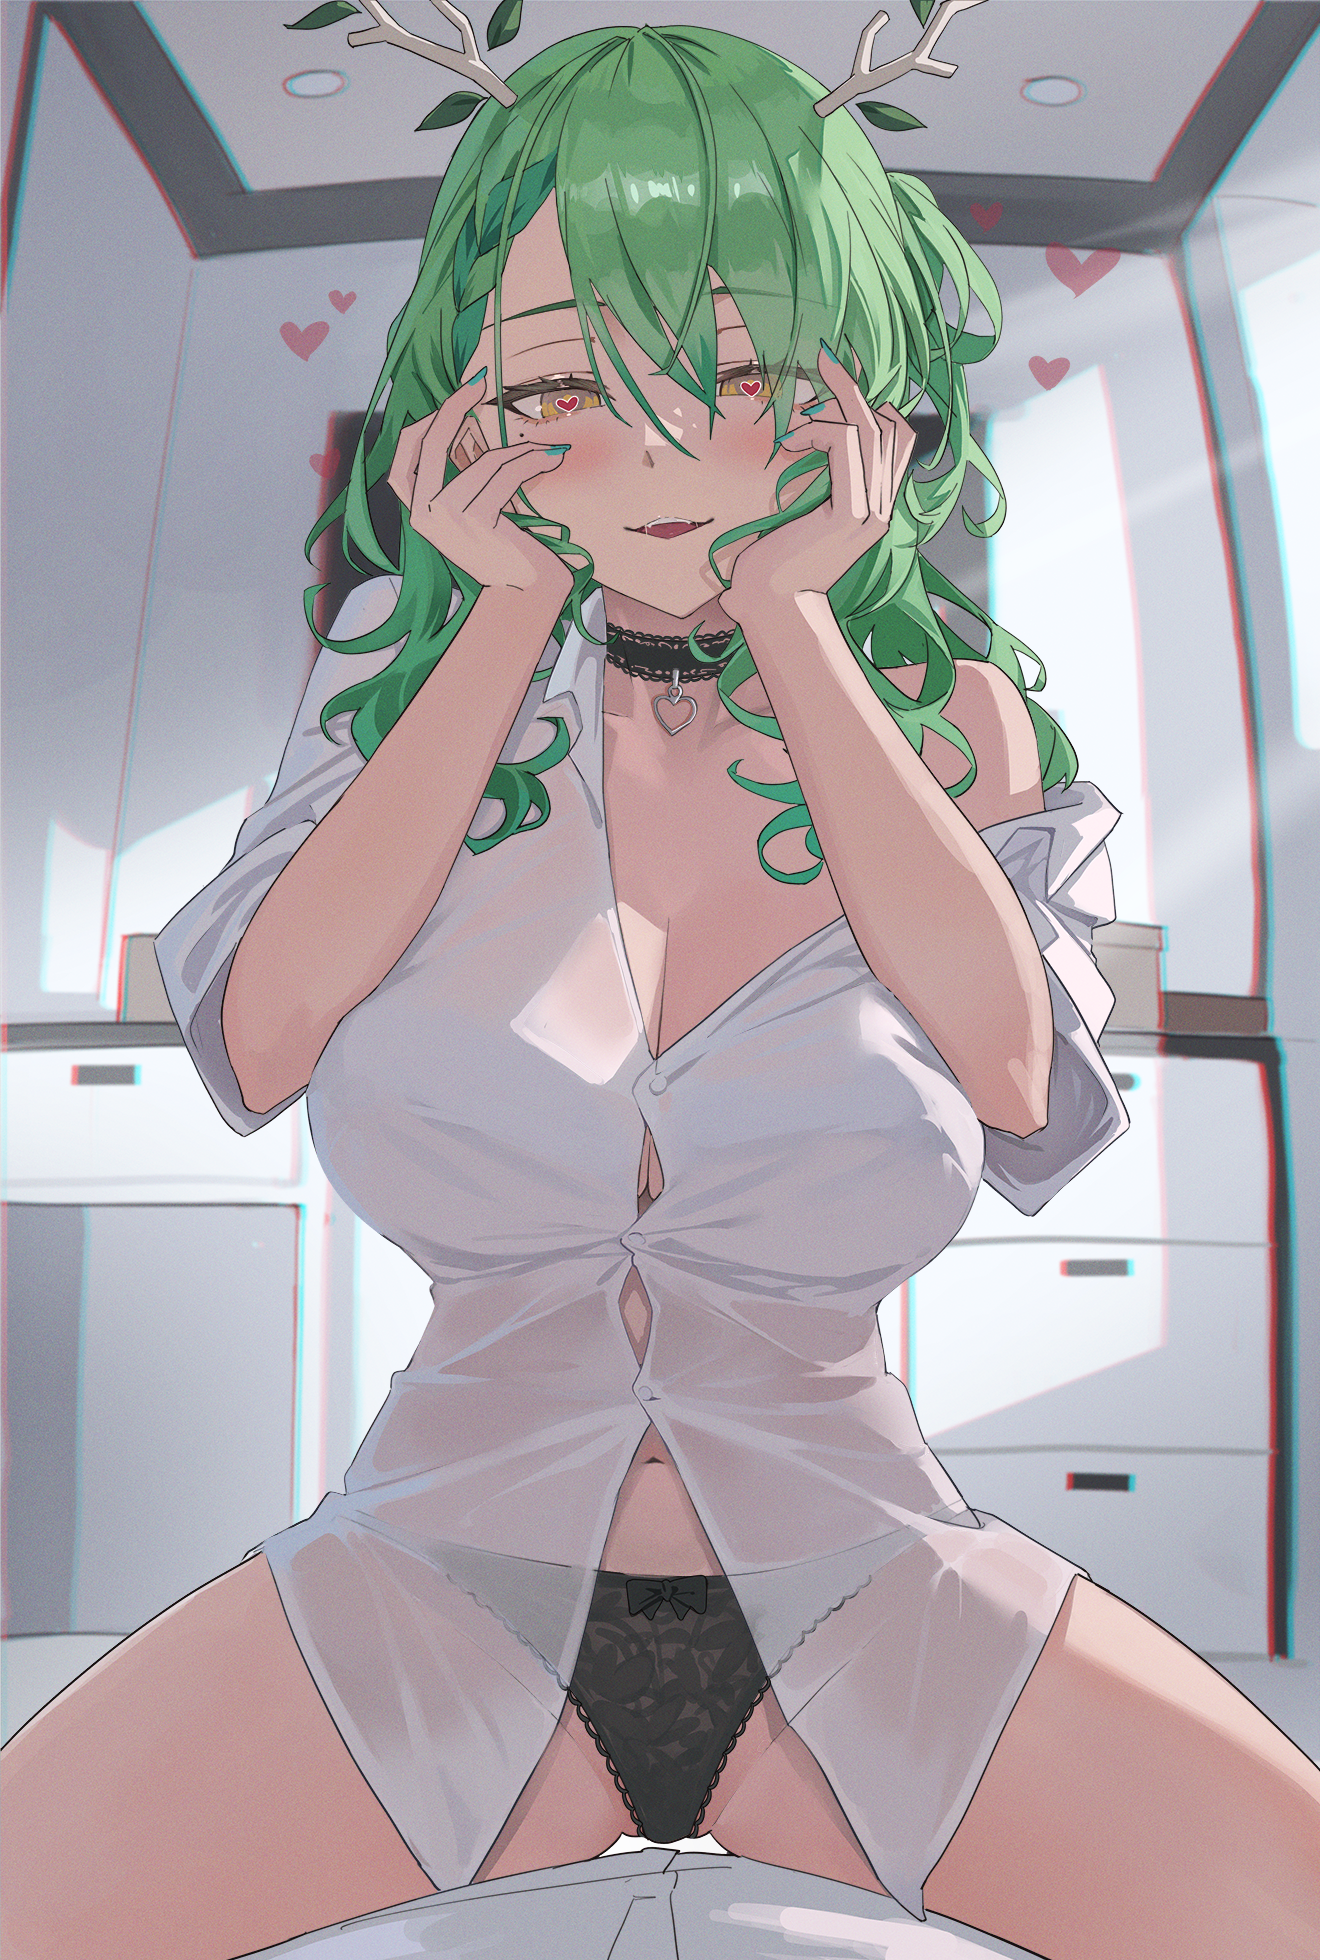 Anime 1320x1960 anime anime girls Virtual Youtuber Hololive Ceres Fauna heart heart eyes cleavage green hair yellow eyes blushing choker panties black panties antlers Archinoer big boobs portrait display indoors women indoors hair between eyes sunlight looking at viewer sitting spread legs long hair hand on face collar mole under mouth smiling moles off shoulder